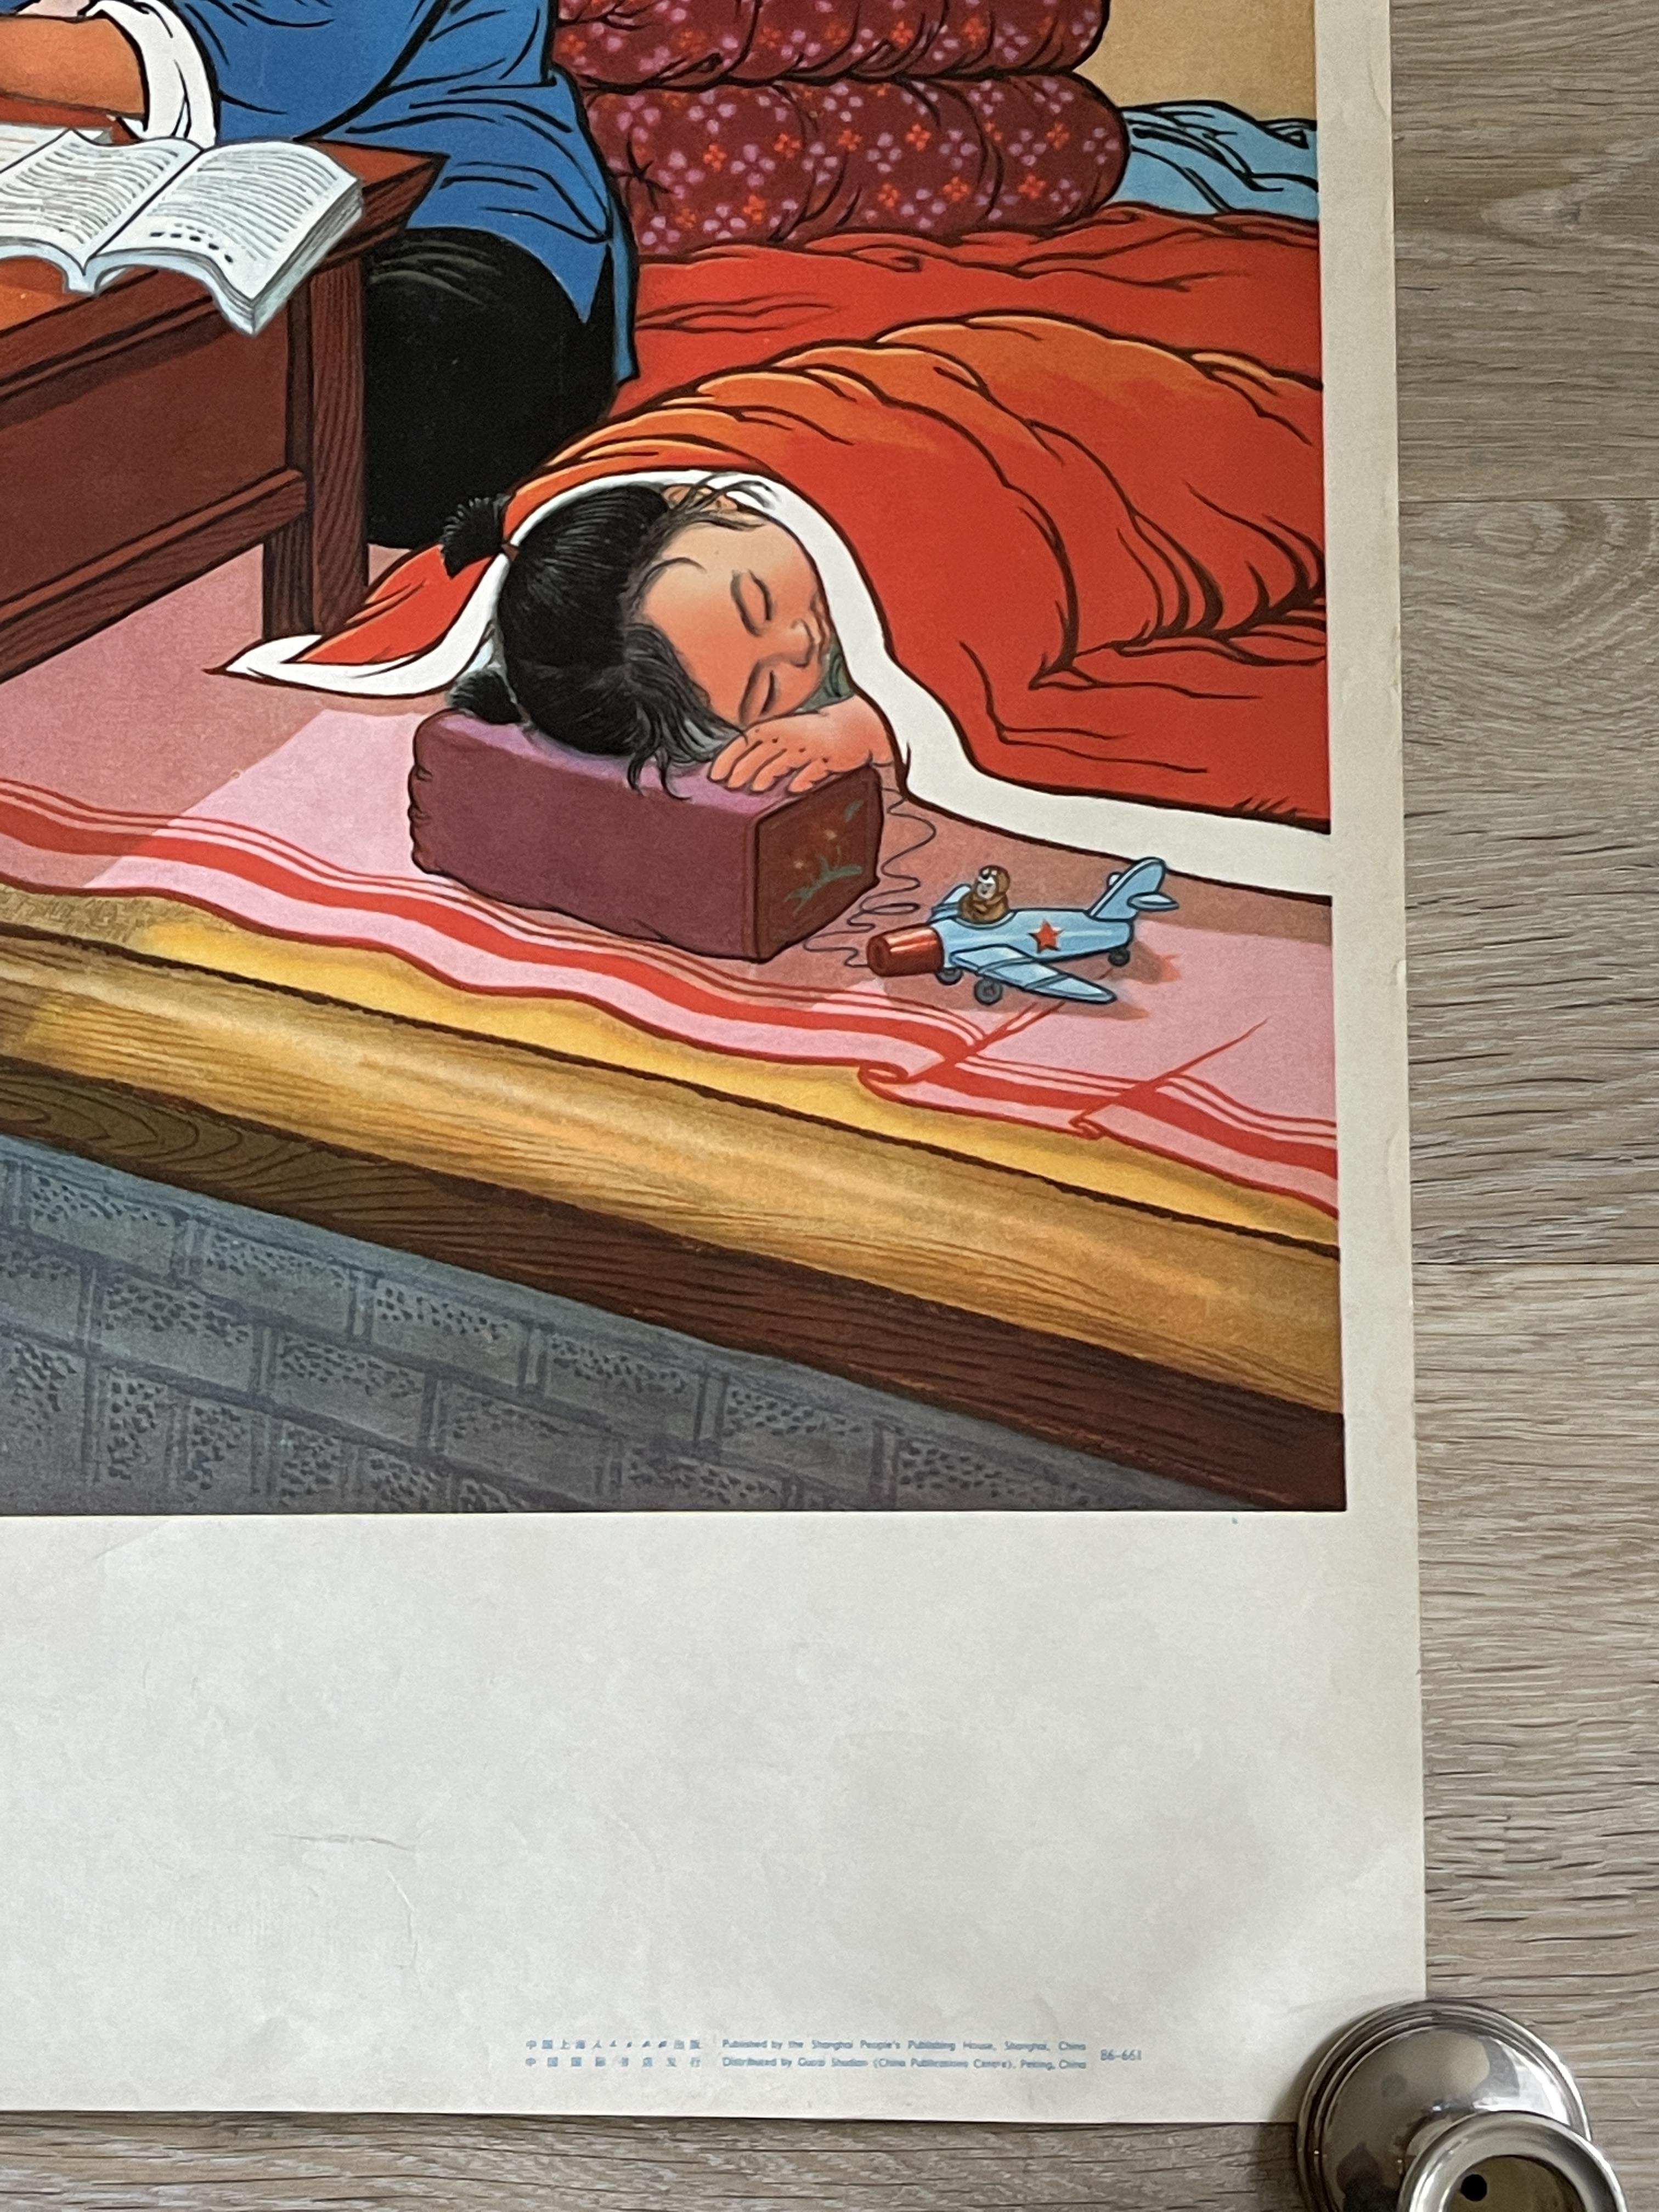 Awake in the Middle of the Night - Original Vintage Chinese Poster - Image 5 of 7